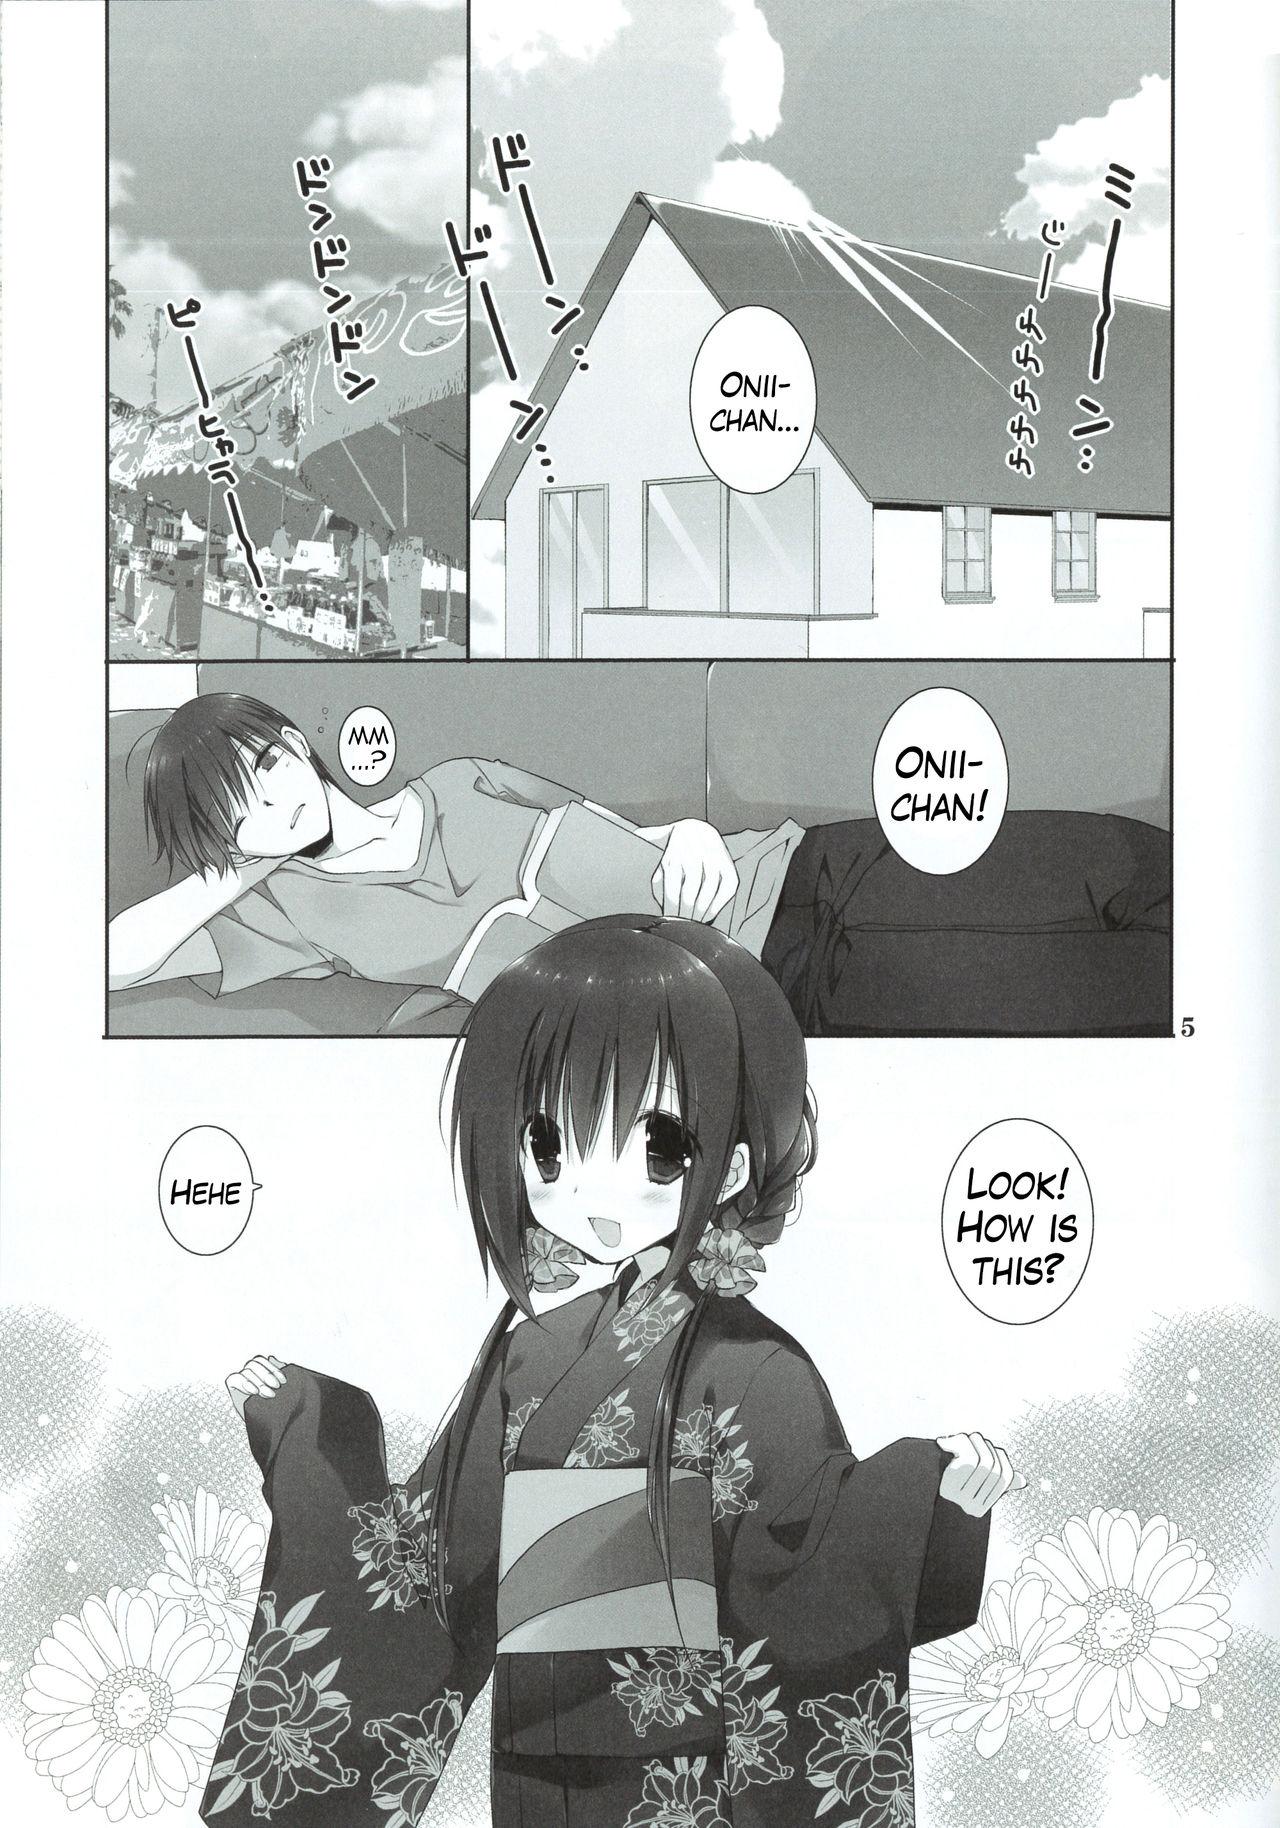 Thief Imouto no Otetsudai 7 | Little Sister Helper 7 Bigbooty - Page 4